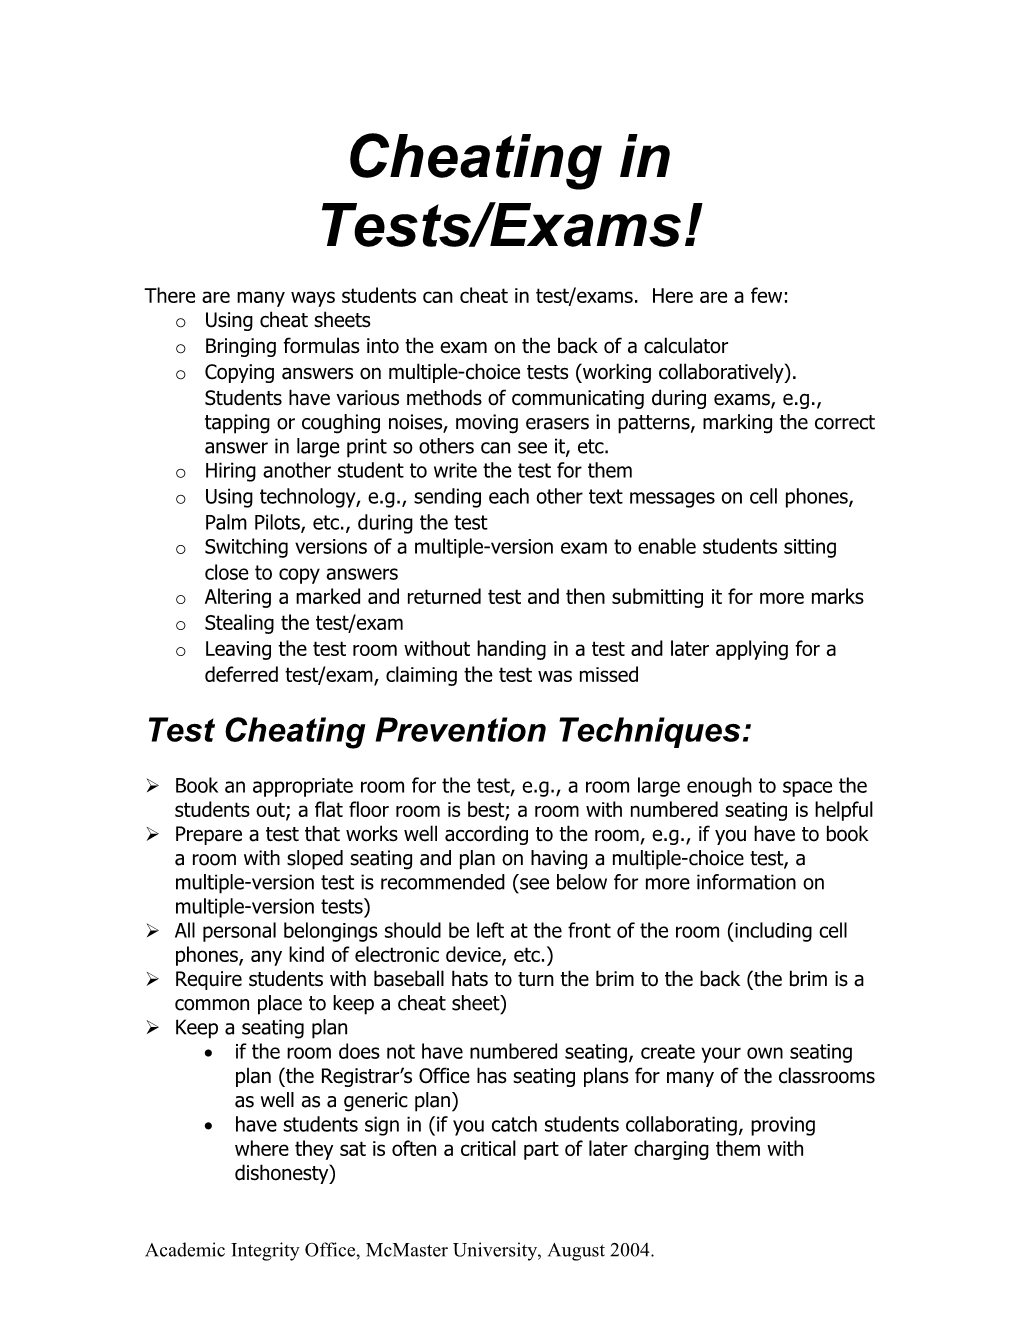 Cheating in Tests/Exams